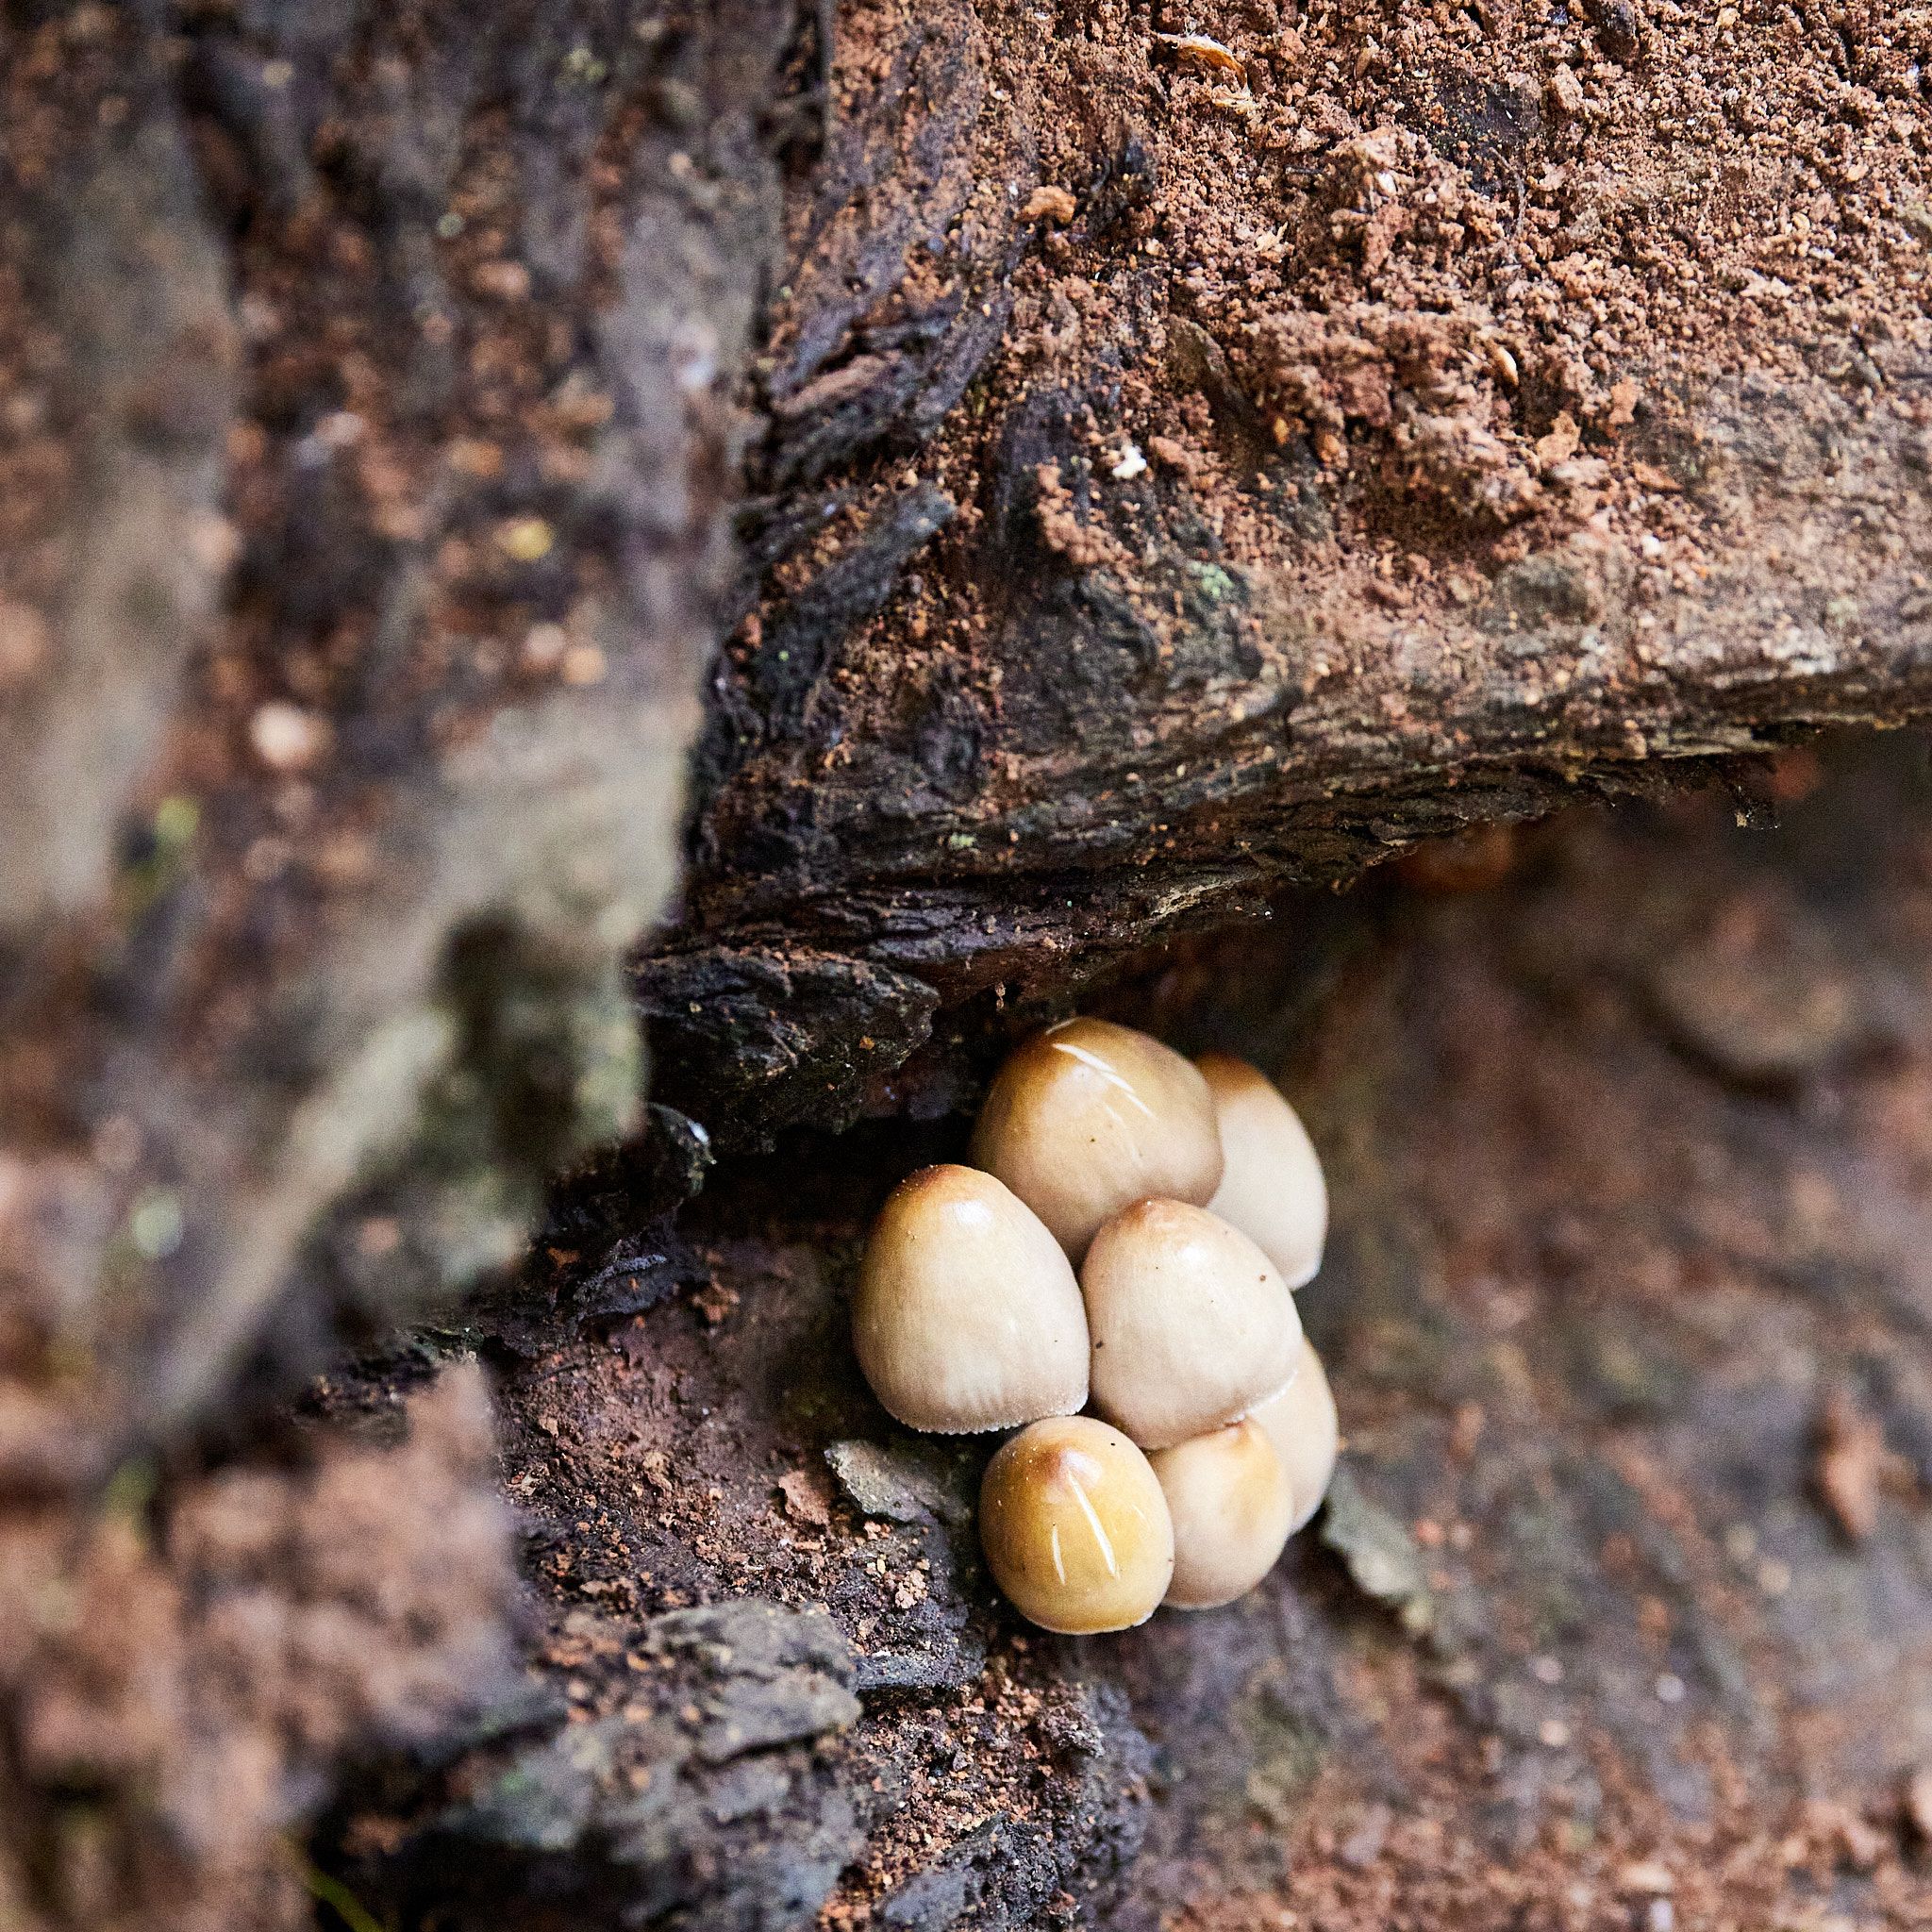 A cluster of mushrooms cling to life in a forest cavity.